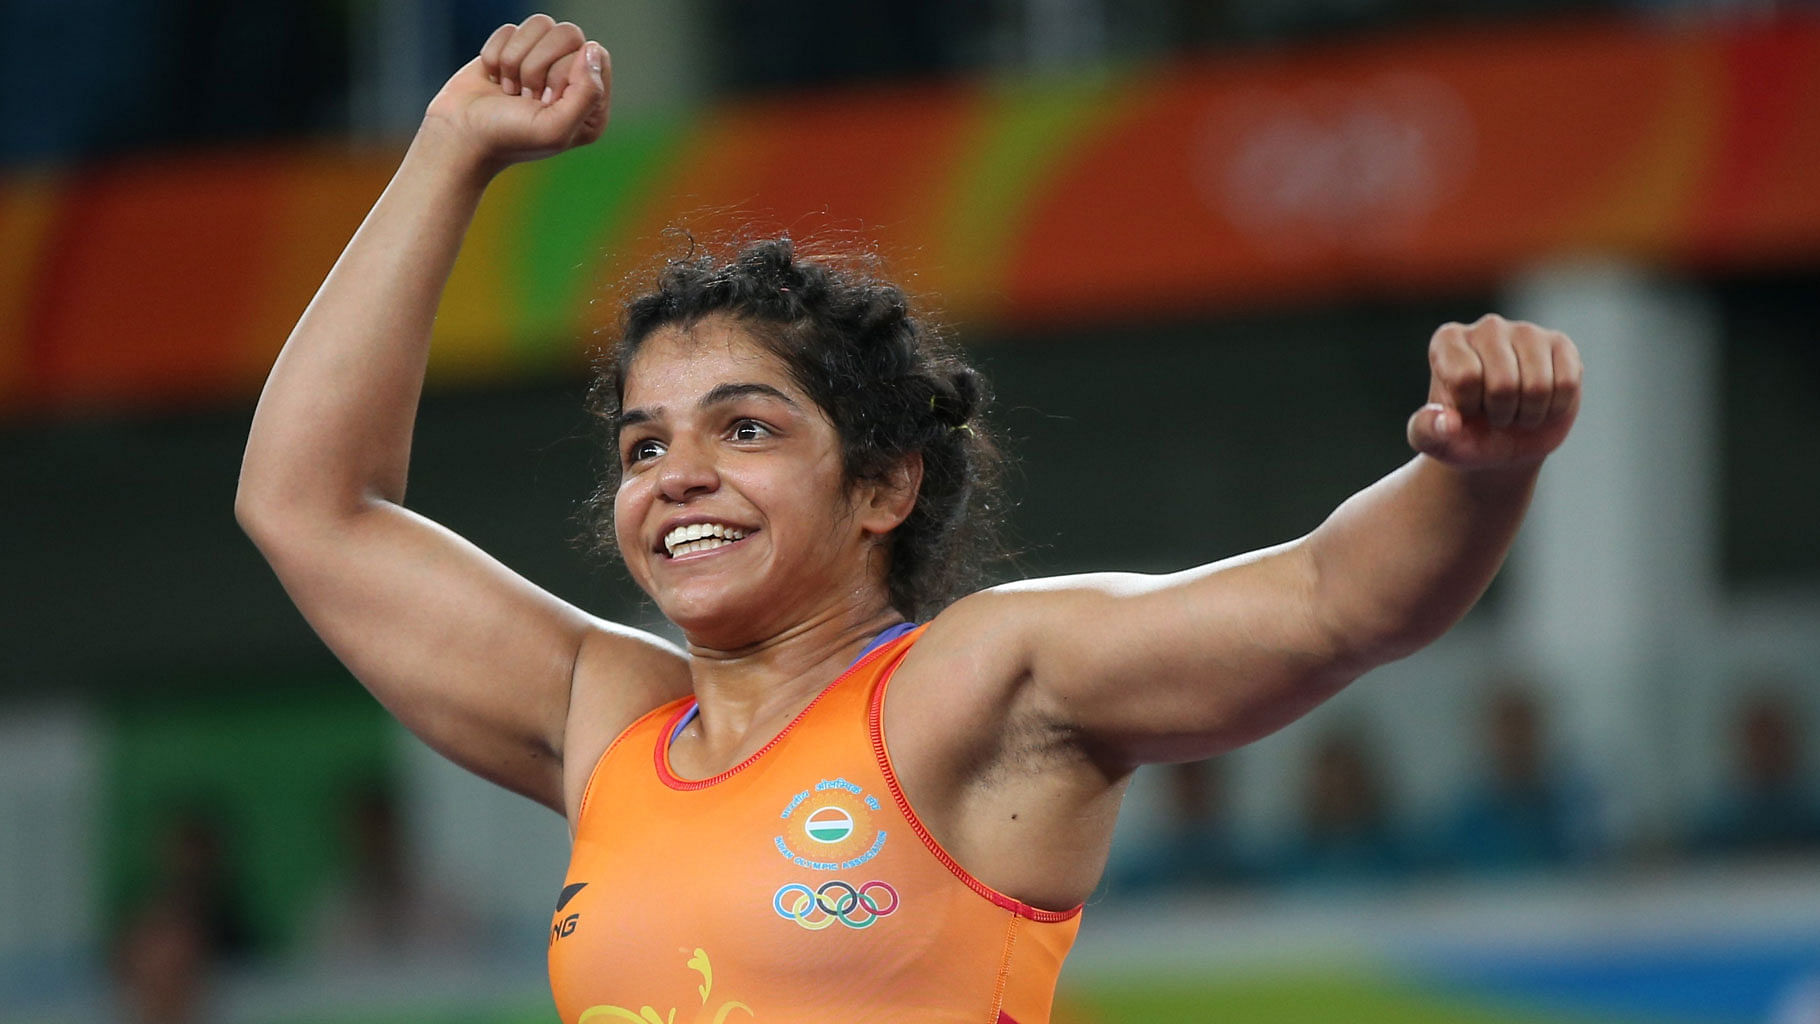 File picture of Sakshi Malik celebrating after clinching the bronze medal at the Rio Olympics in 2016.